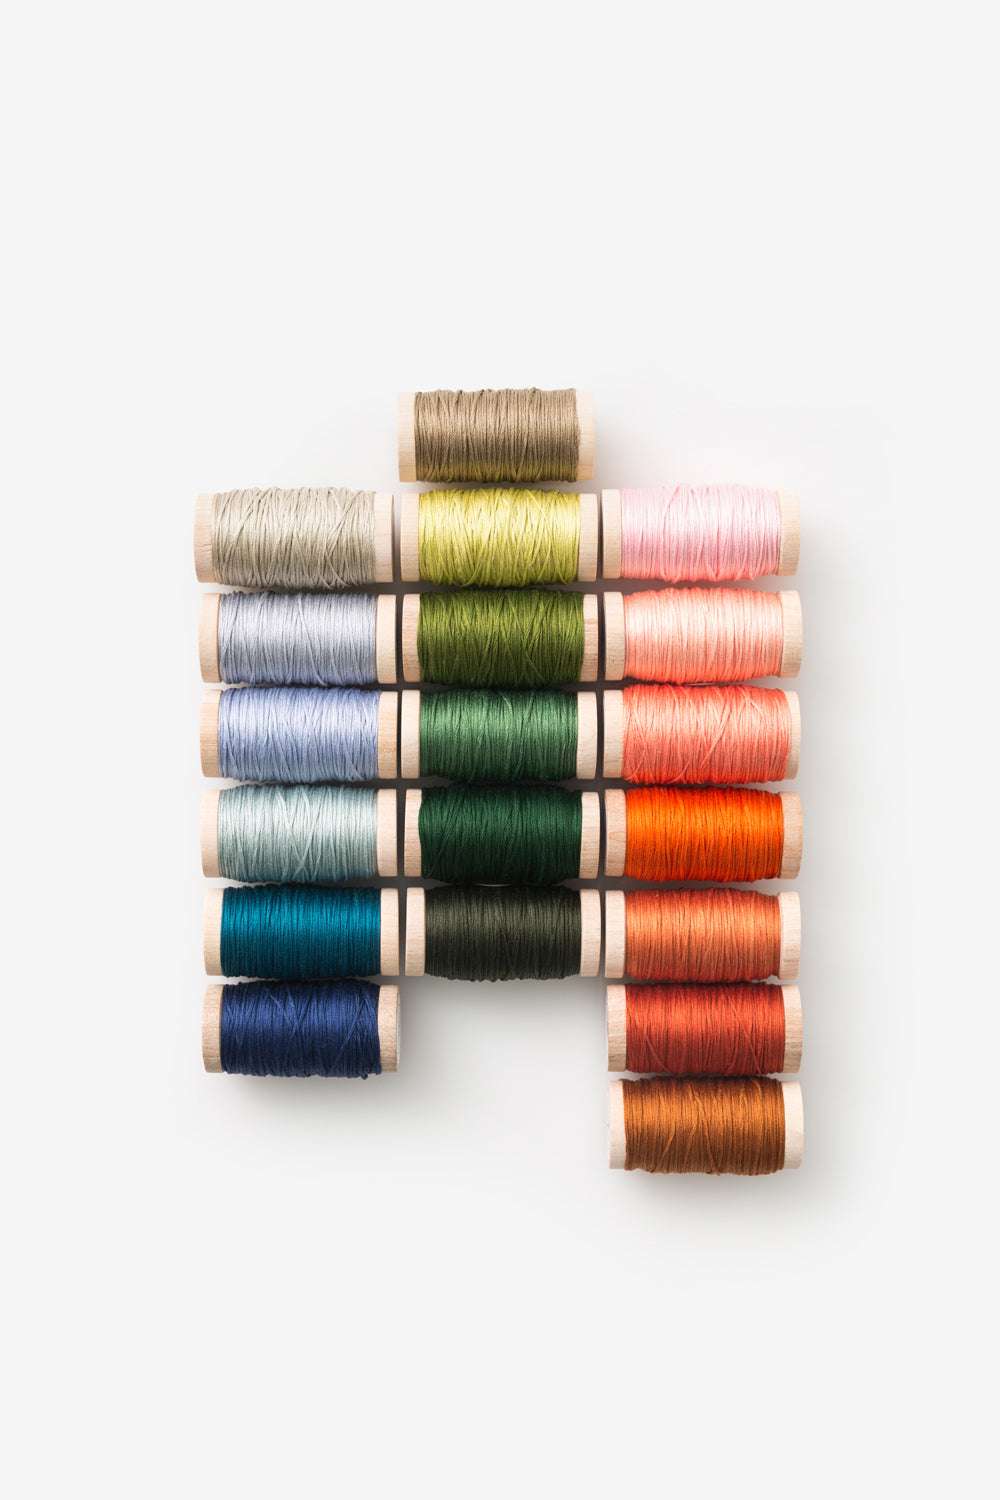 image of Embroidery Floss